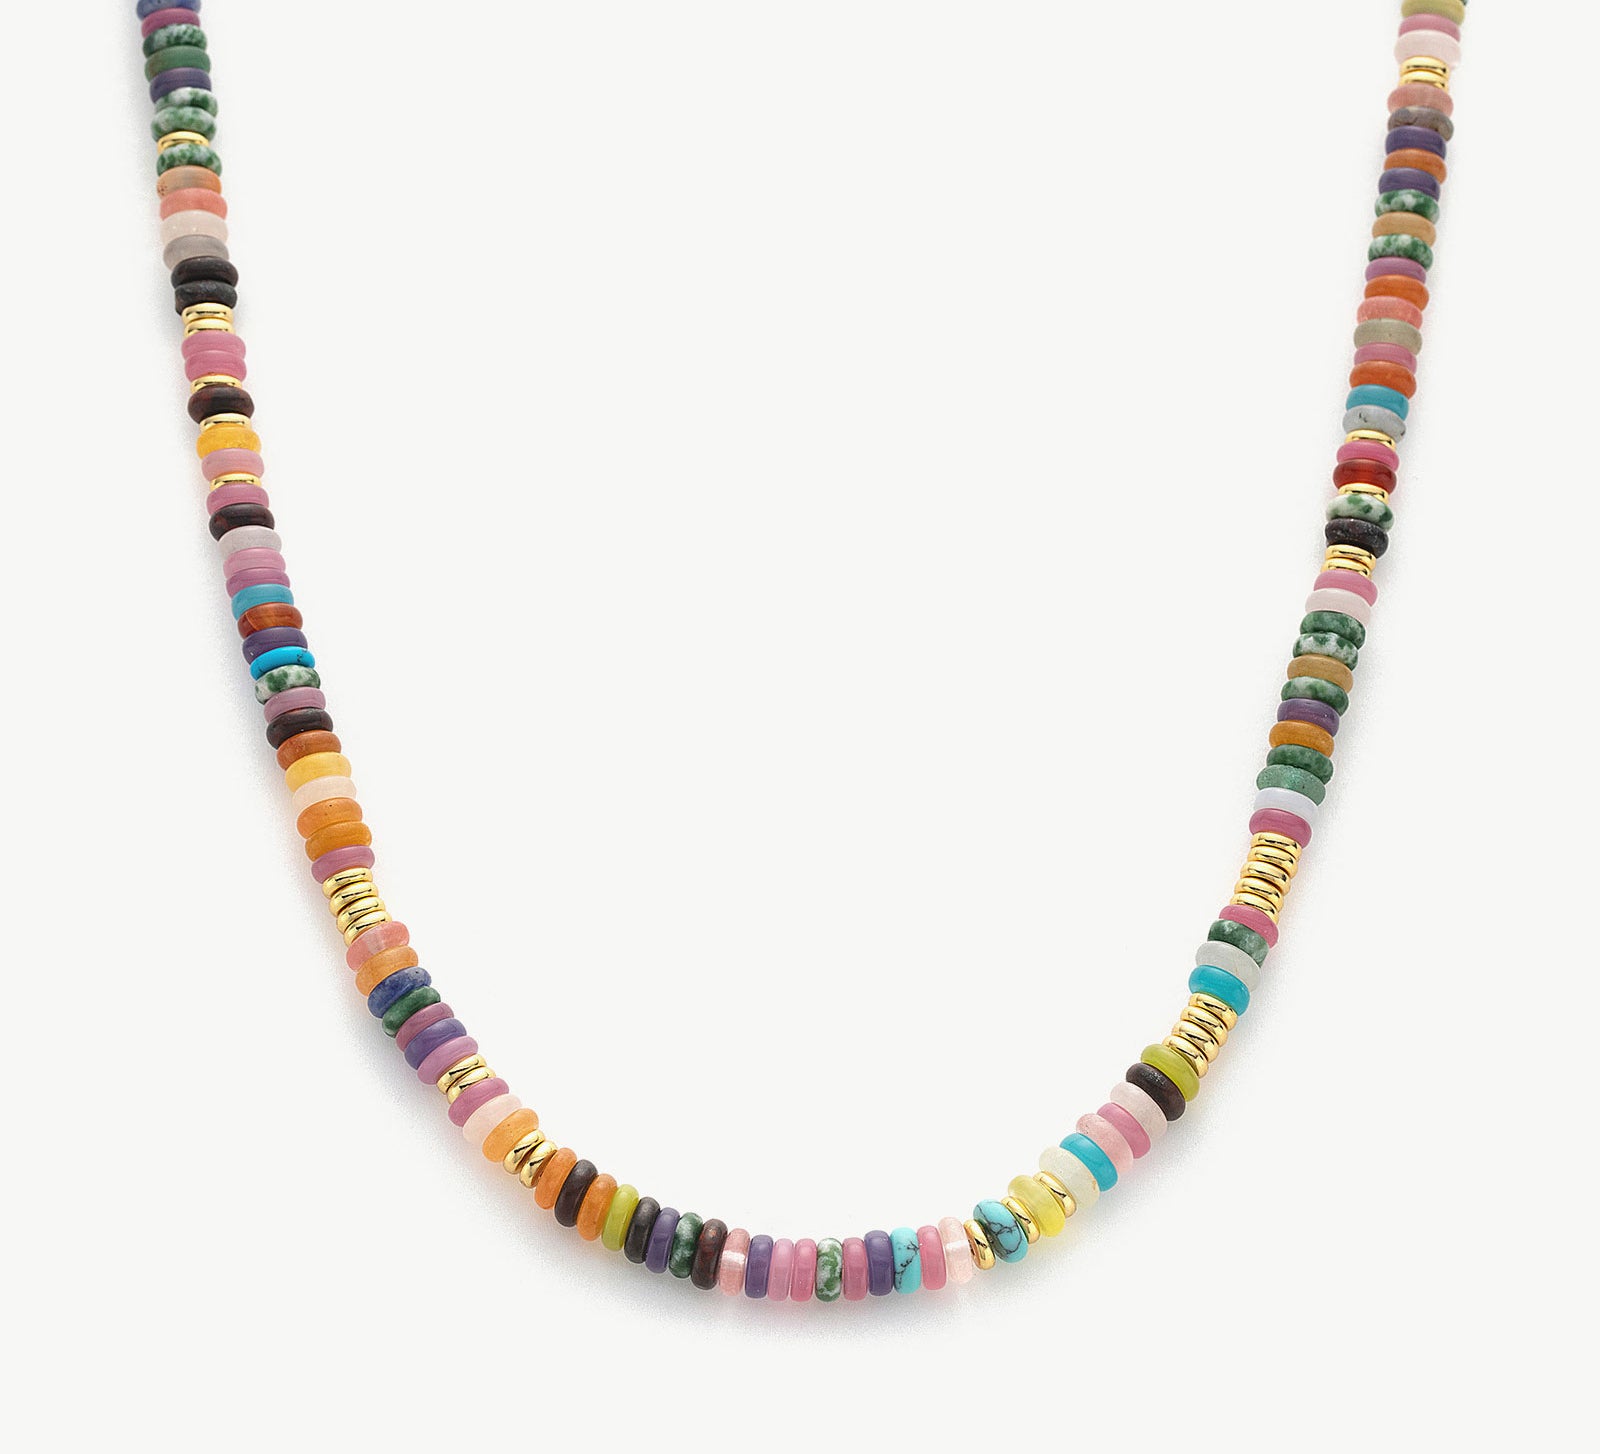 Multi Shell Necklace, a bohemian-inspired piece featuring an assortment of shells in various shapes and sizes, creating a laid-back and beachy accessory for those carefree coastal vibes